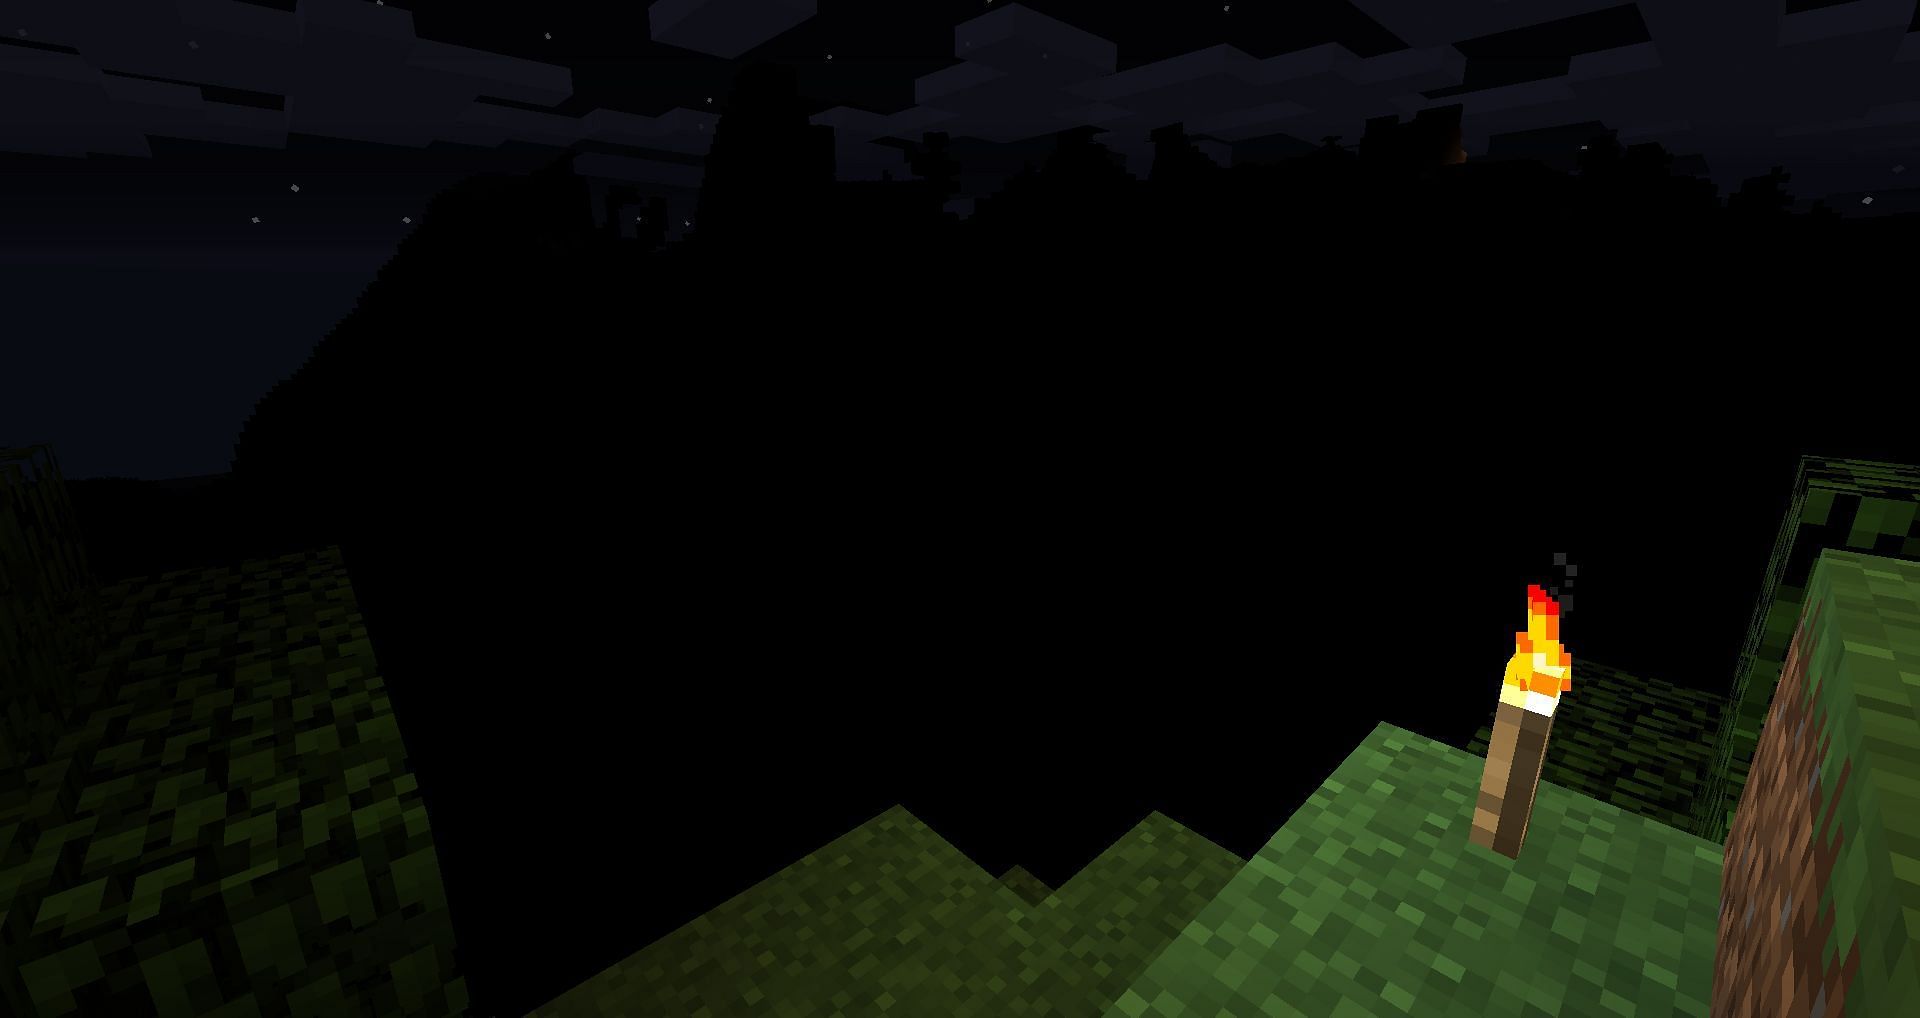 This drastically reduces the visibility by darkening everything in Minecraft (Image via CurseForge)